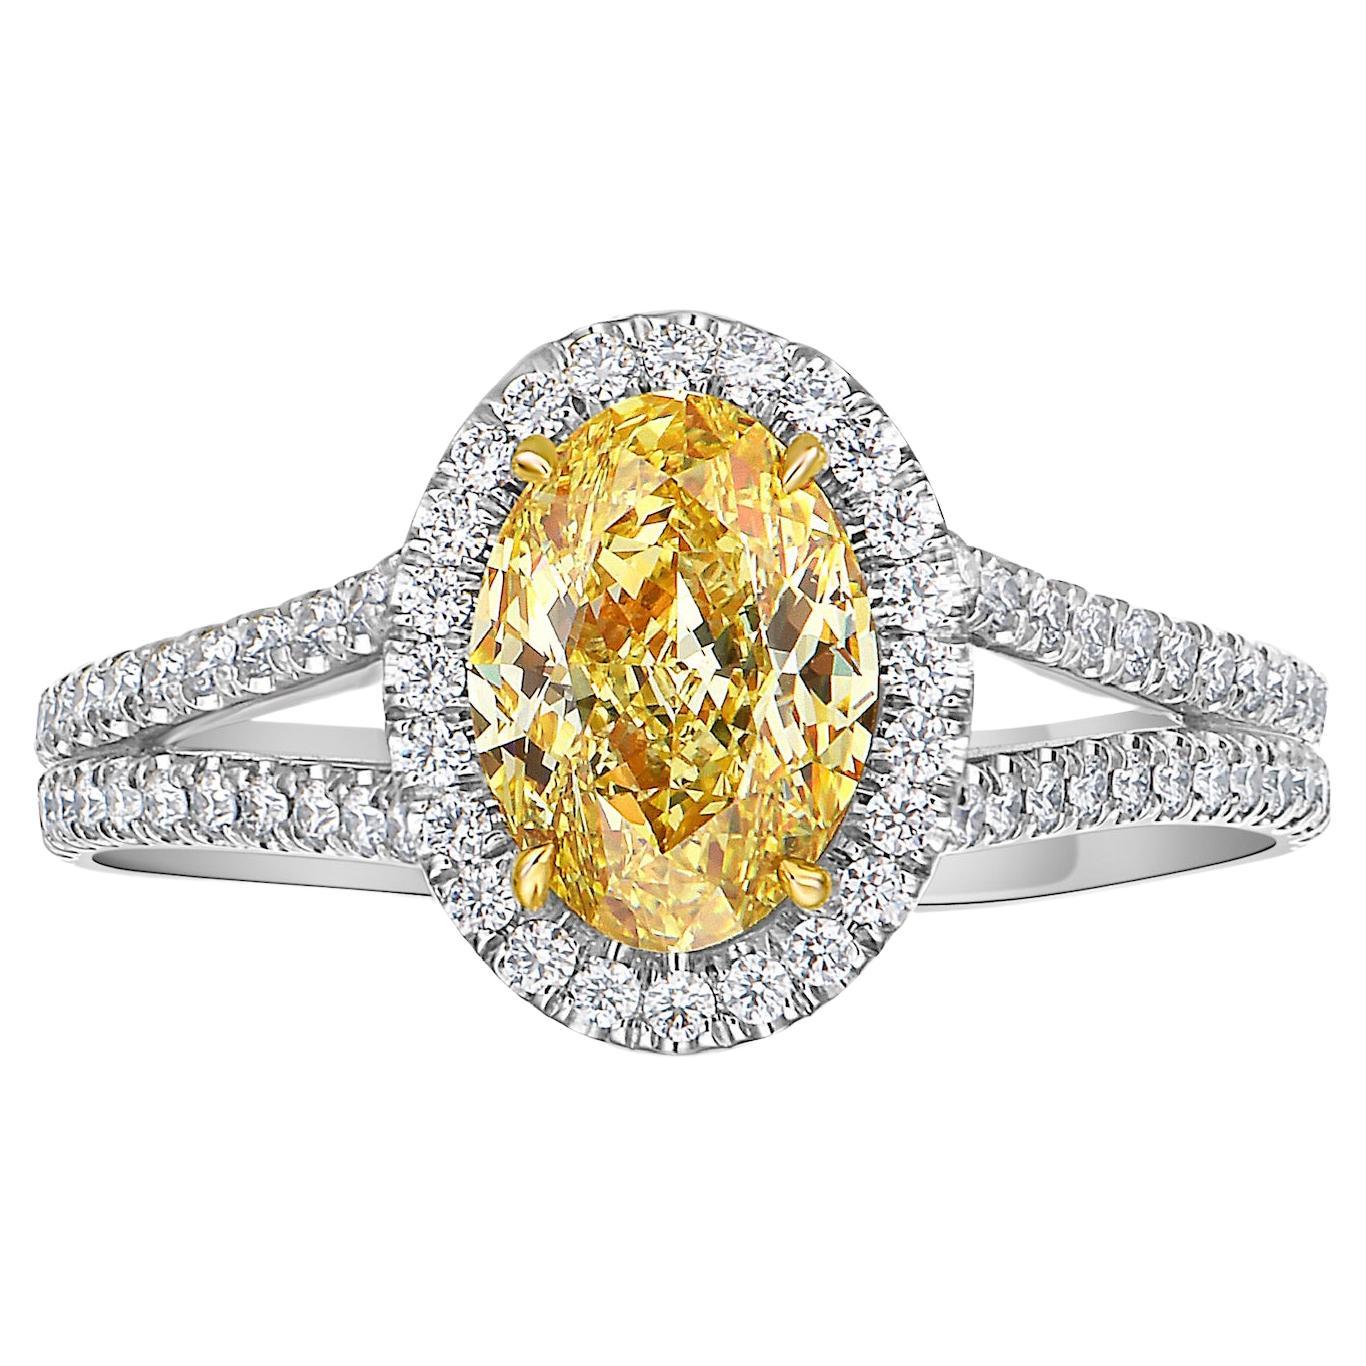 1.47ct GIA Fancy Intense Yellow Oval Diamond Ring For Sale